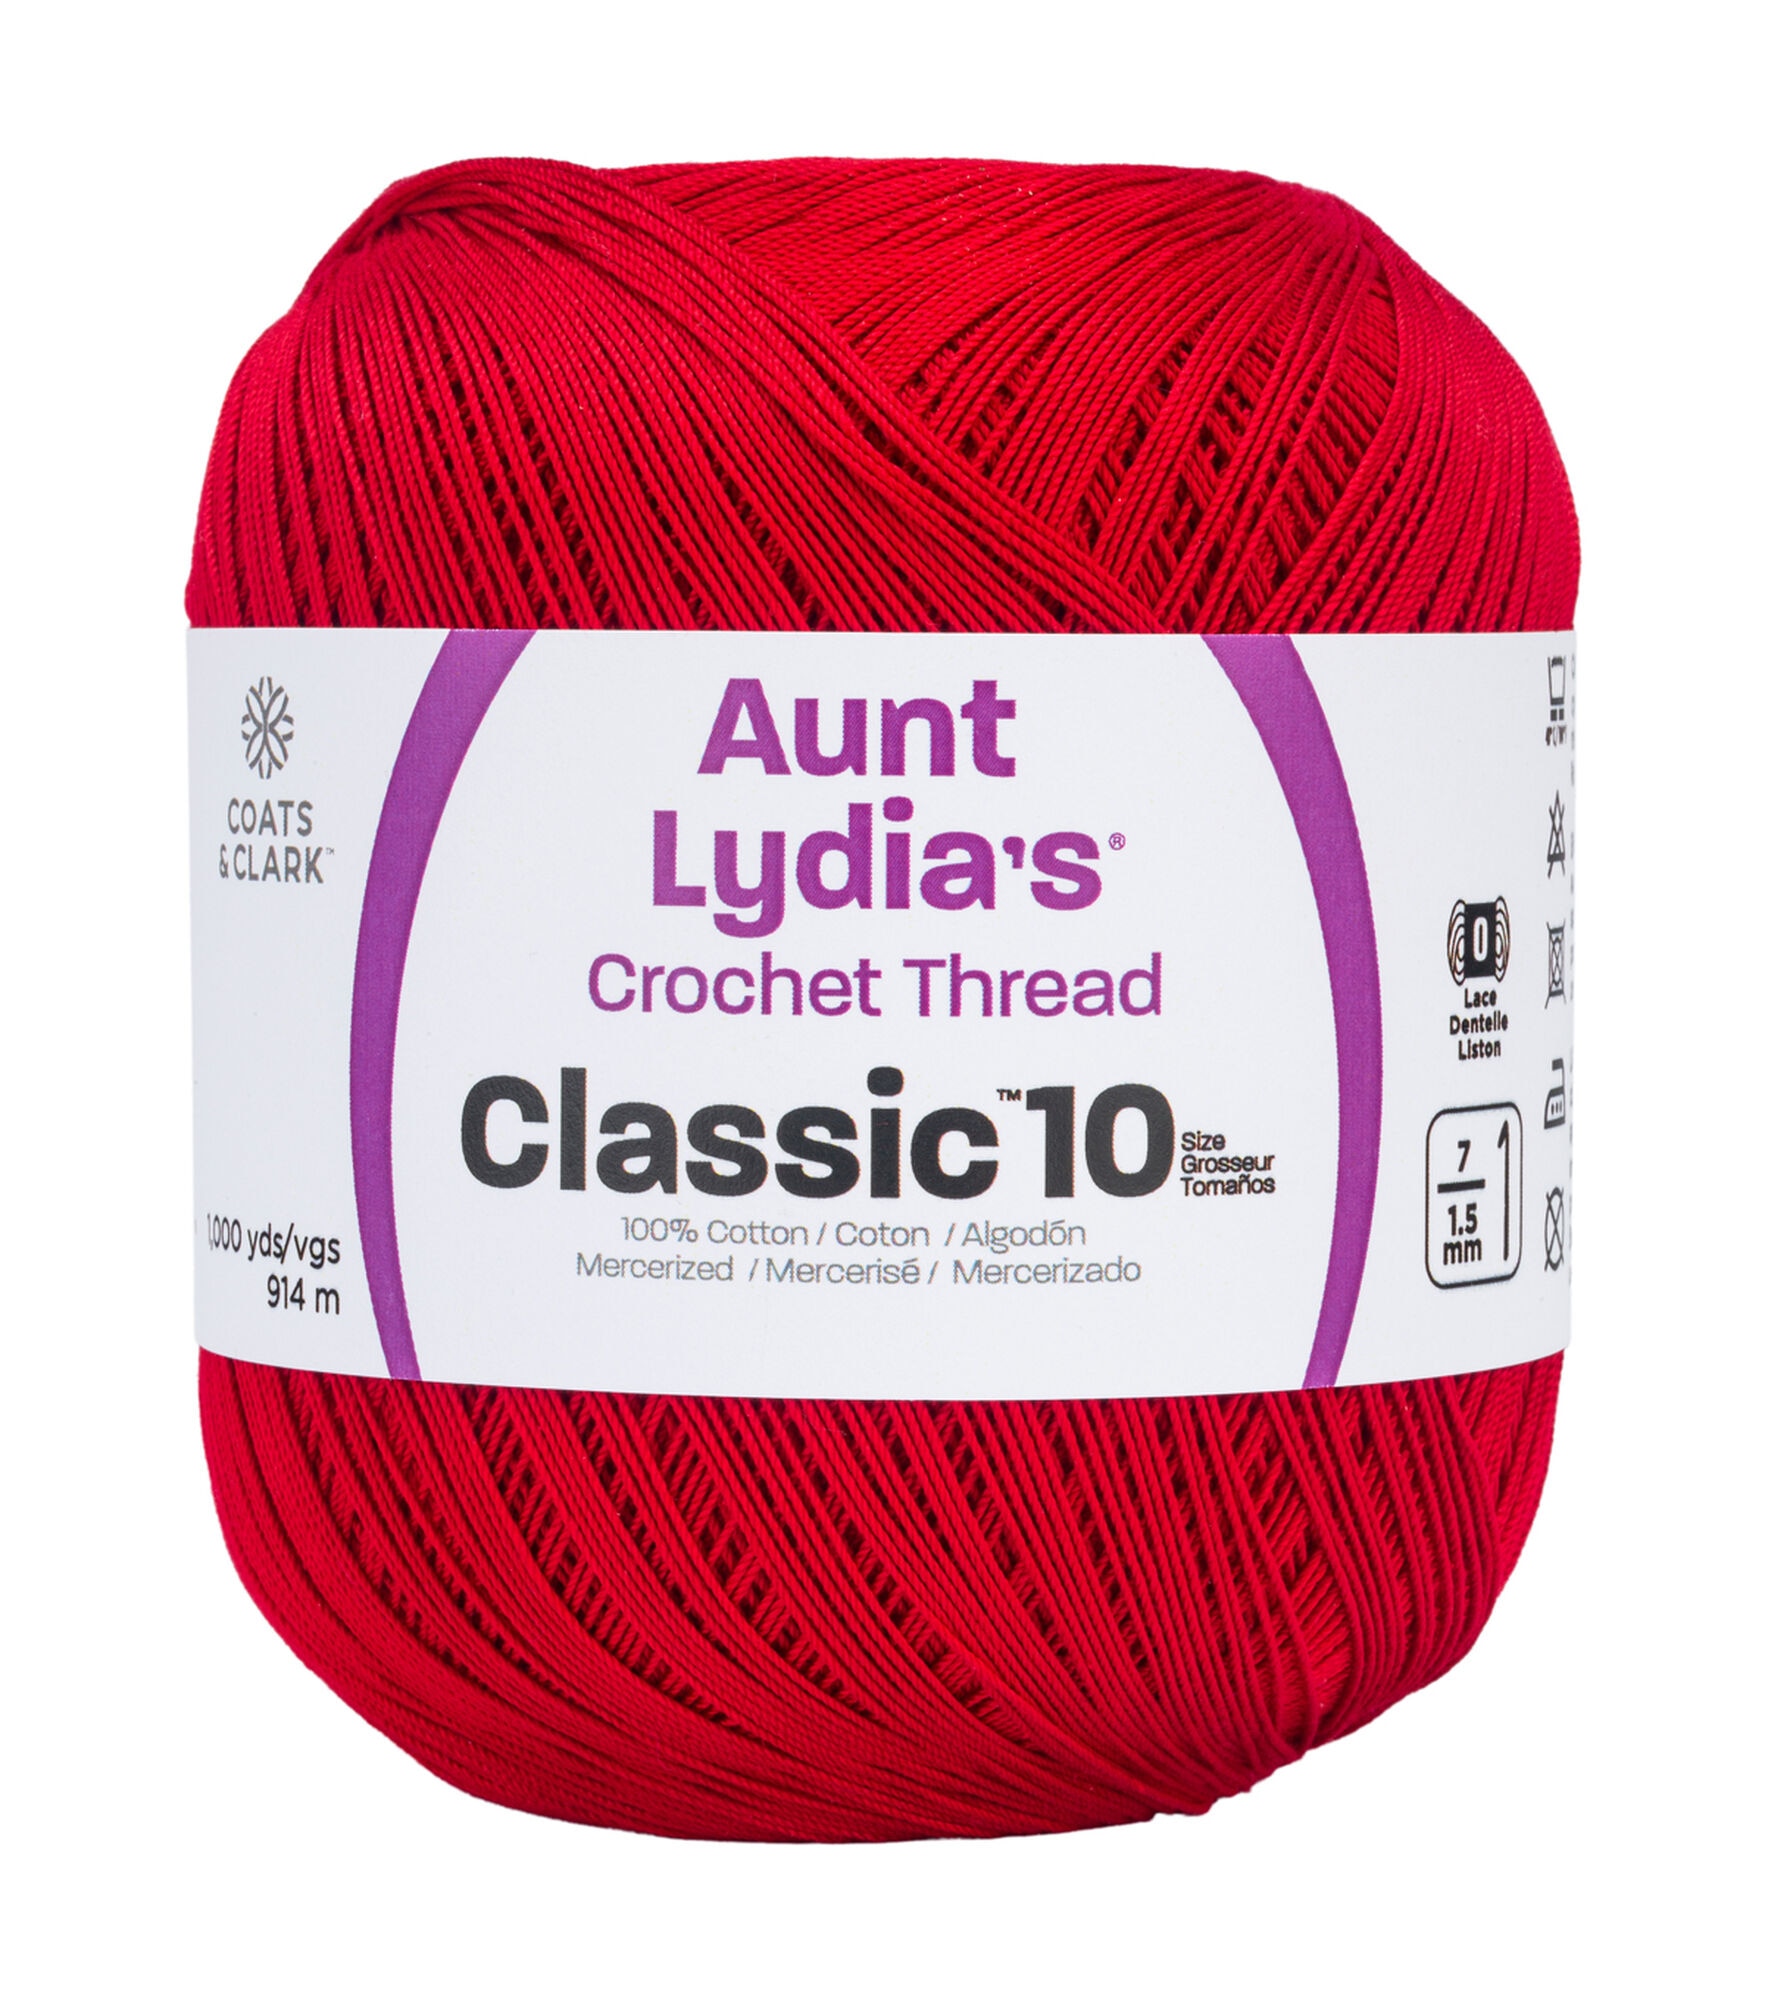 Aunt Lydia's Crochet Thread and Pattern Boutique